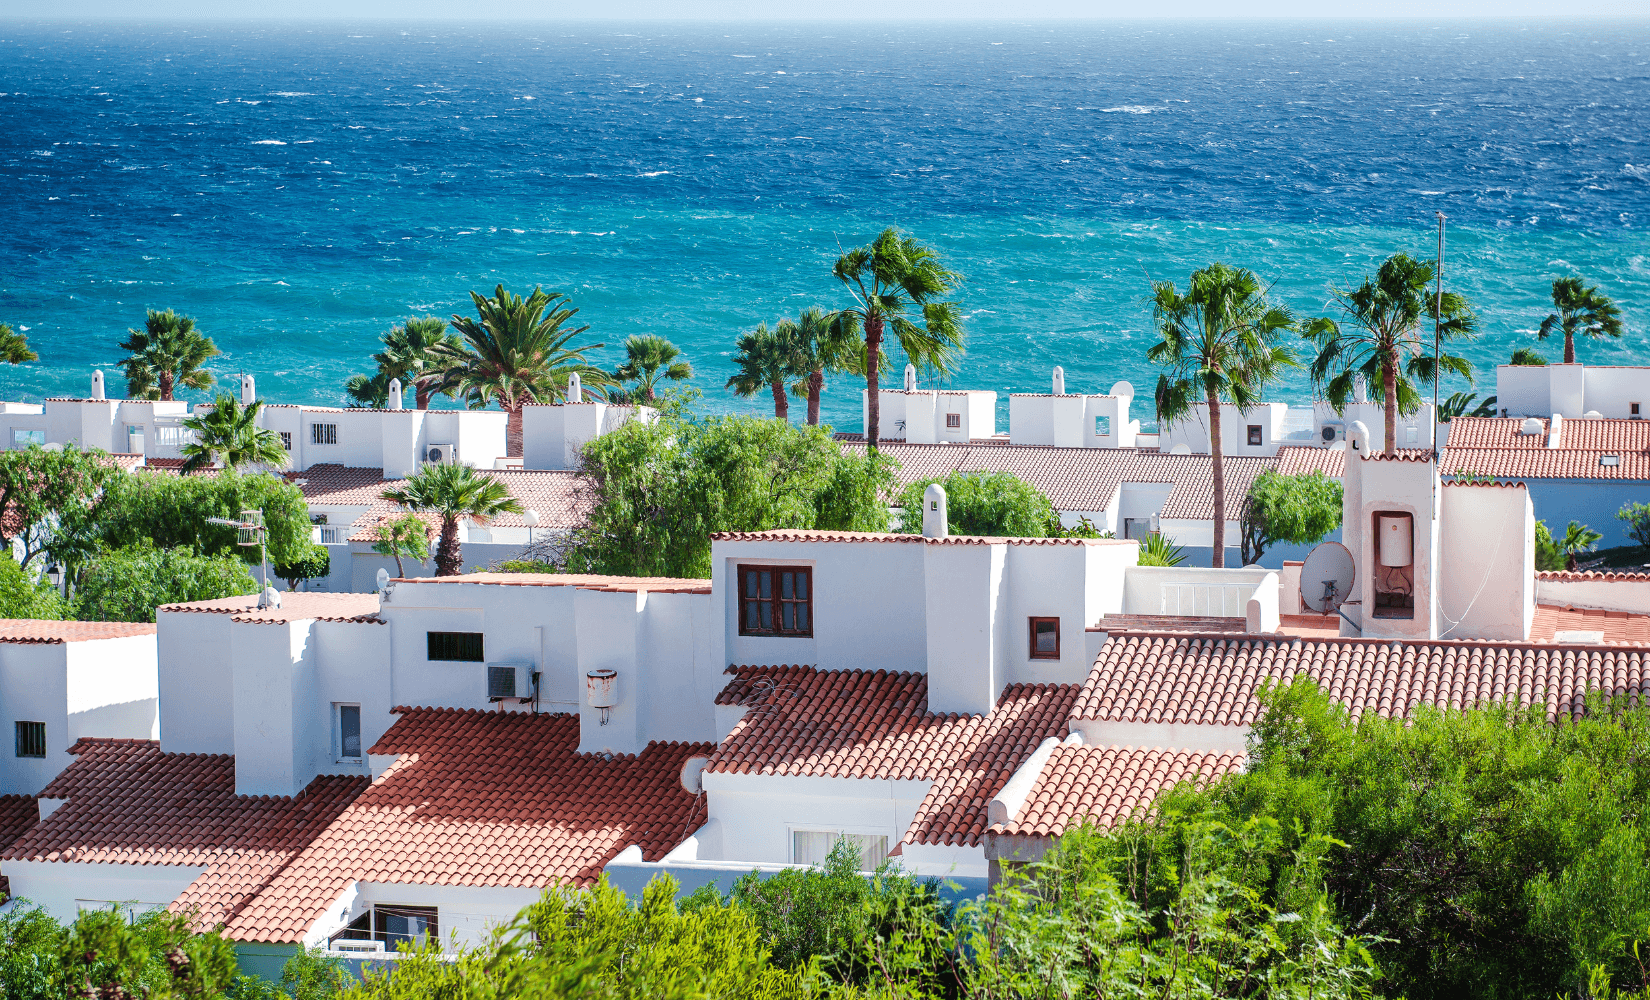 The 8 Best Day Trips in Tenerife